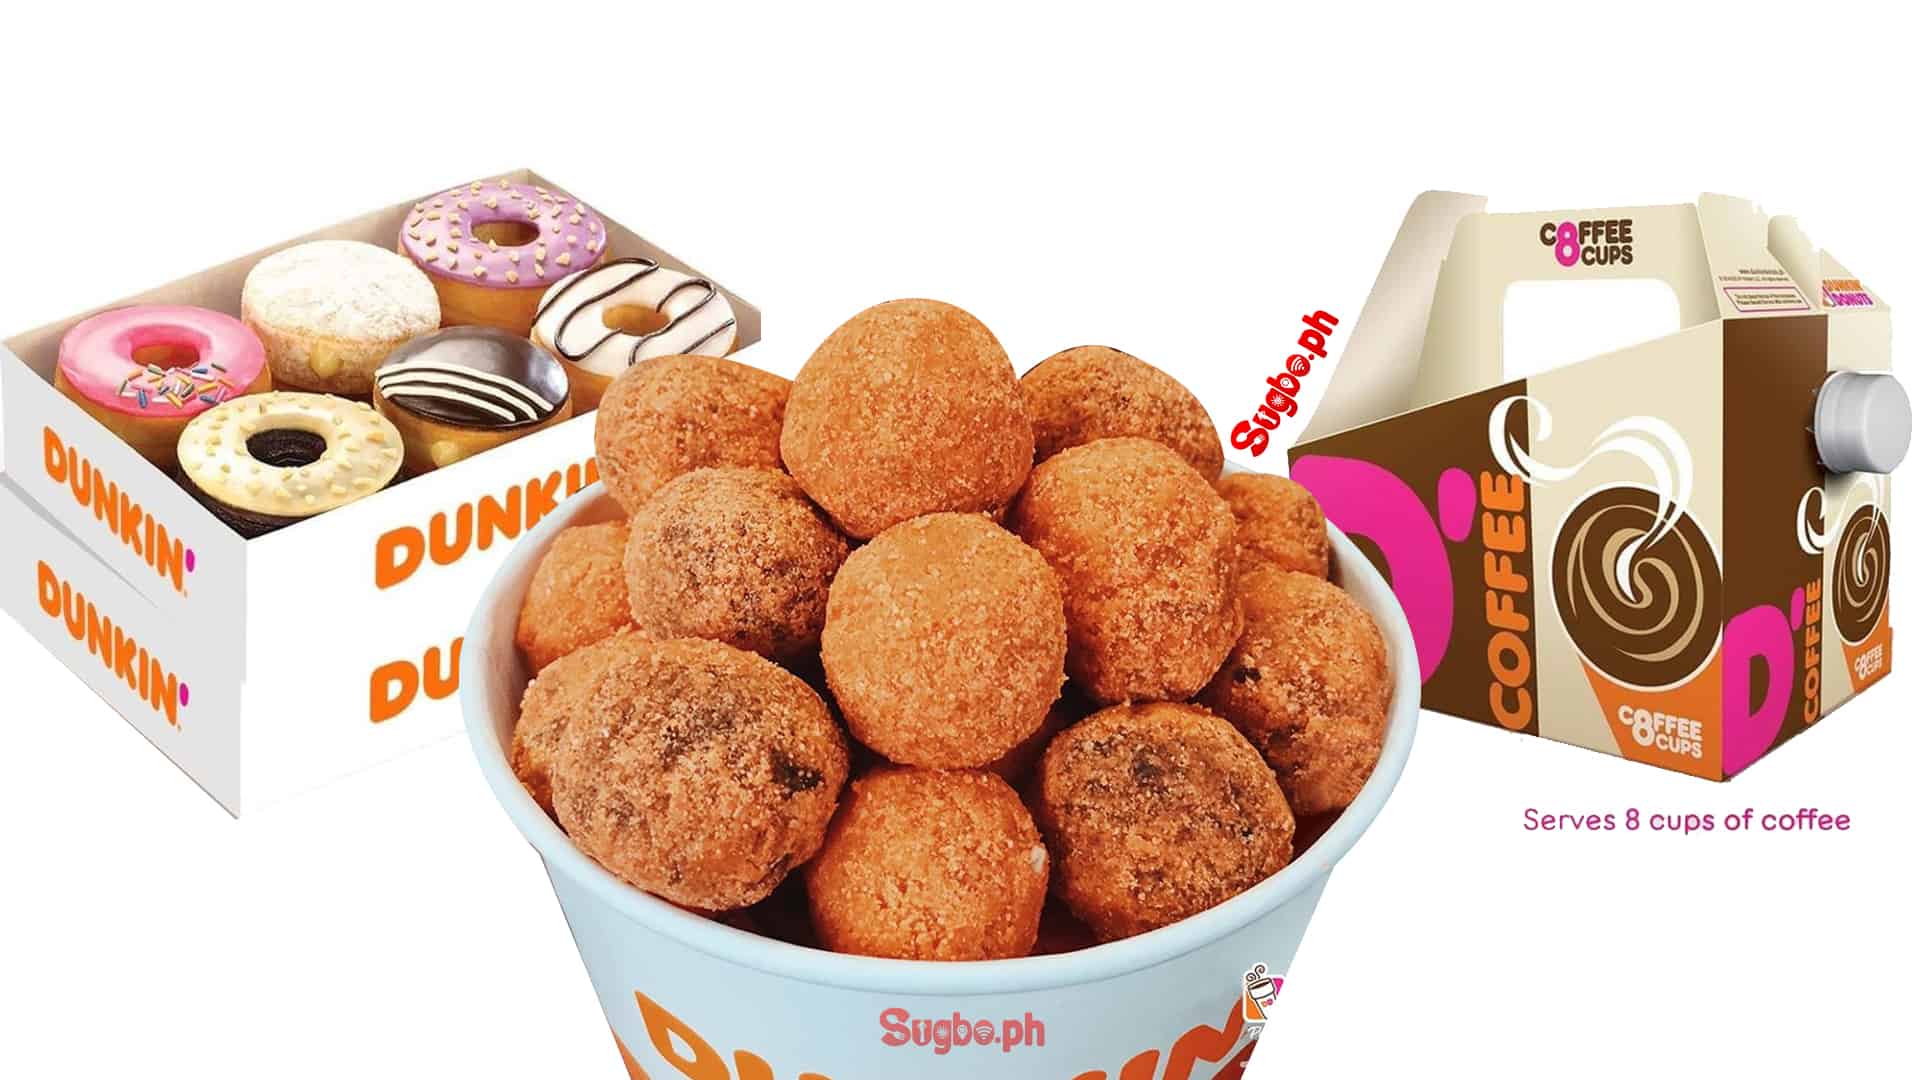 Dunkin' Donuts now offers delivery in Cebu City and